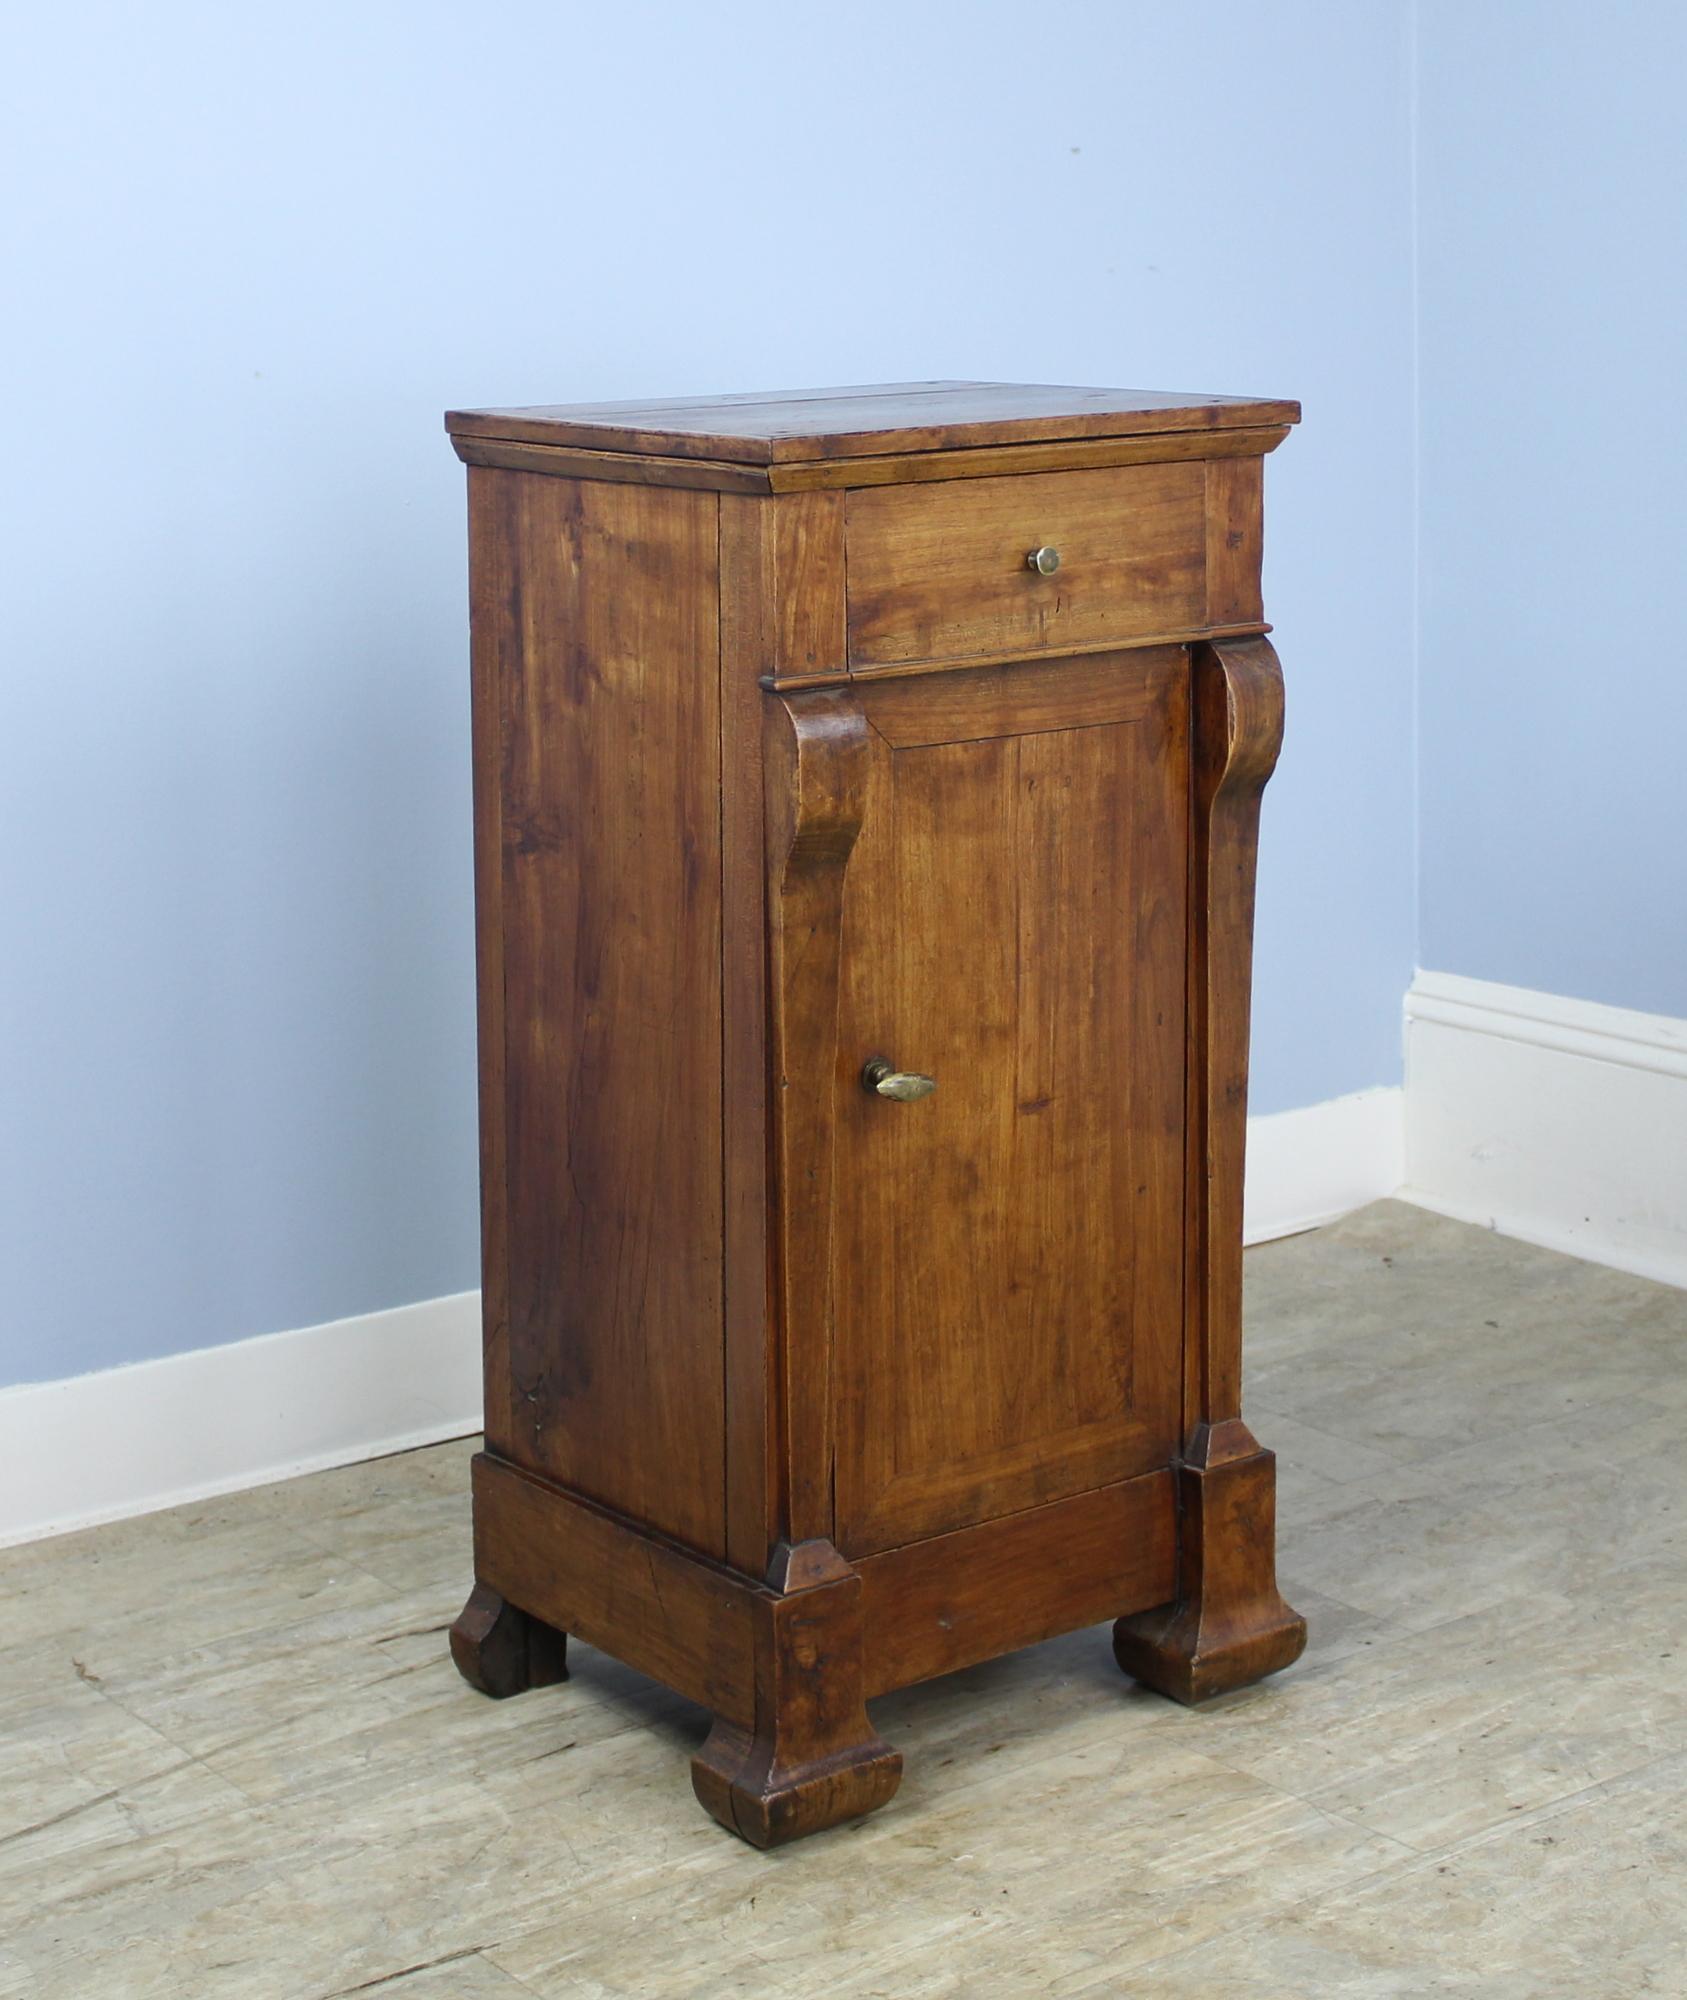 Terrific graining on this cherry side cabinet, with good carved details at the top. Sweet little drawer, and a hand-turned small knob. Lovely classic chamfered feet. Great storage for a practical and handsome nightstand. Correct height for a lamp.